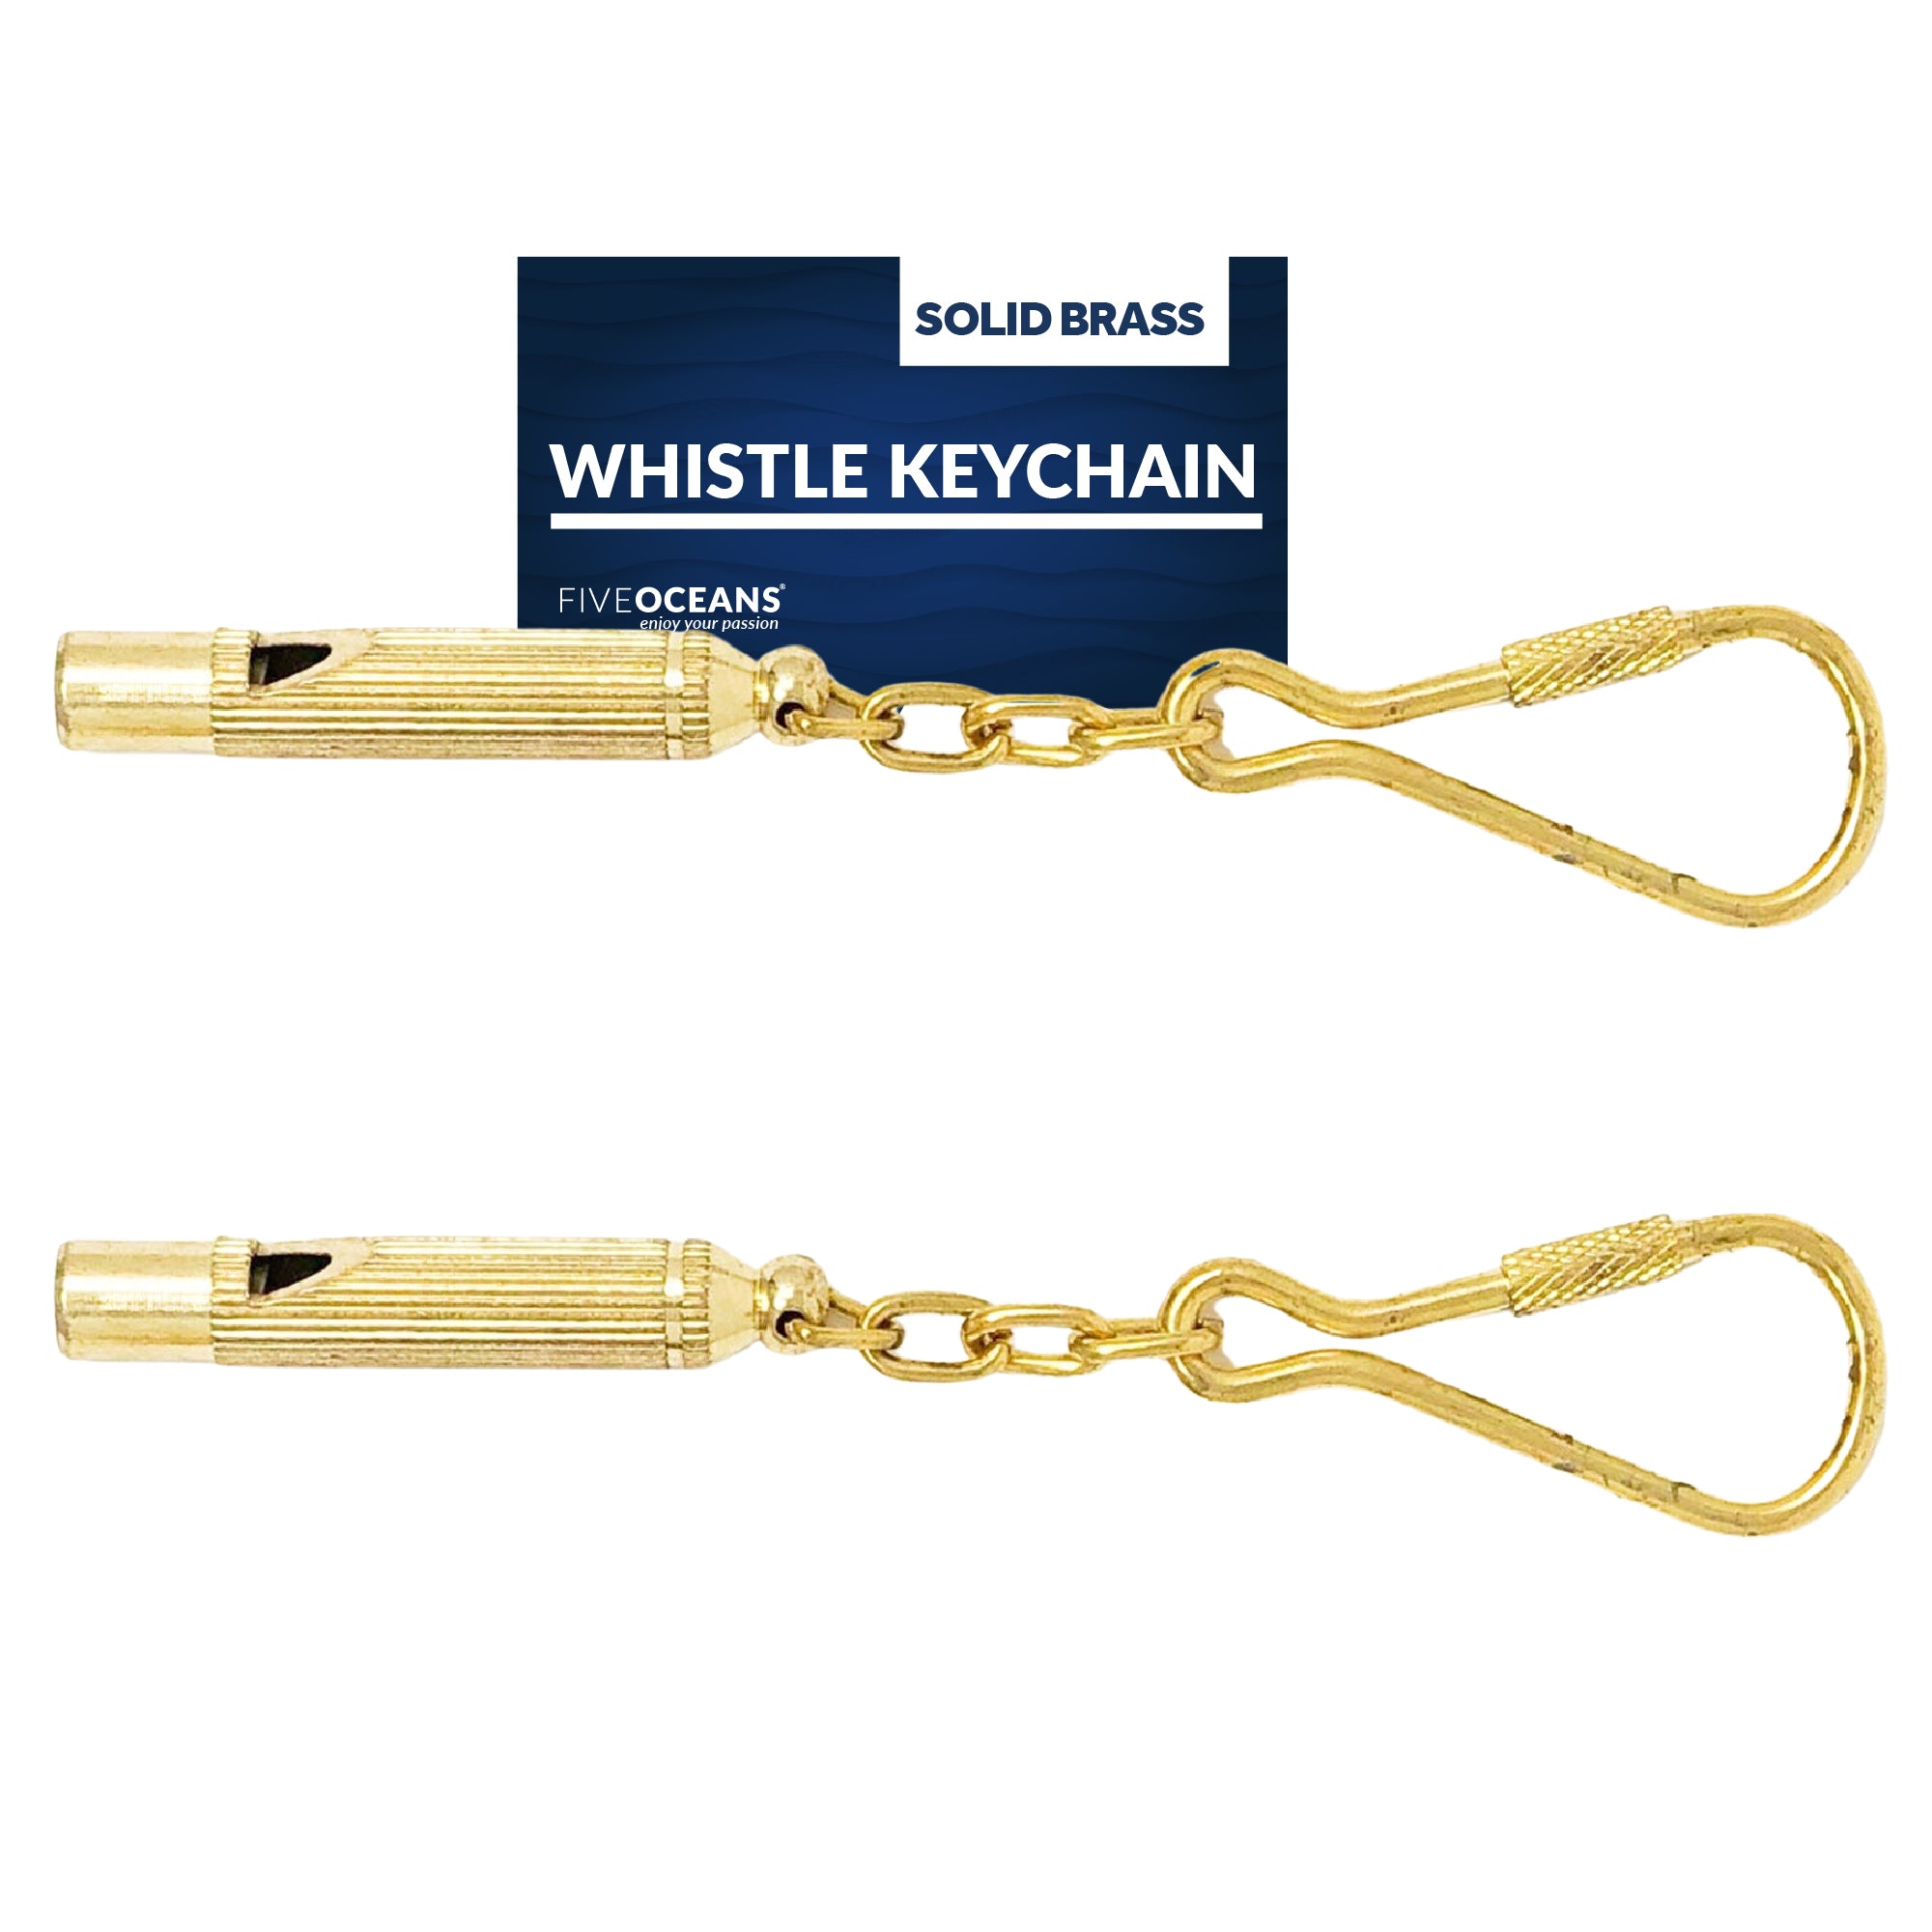 Whistle Keychain, Solid Brass 2-Pack - FO2219-M2